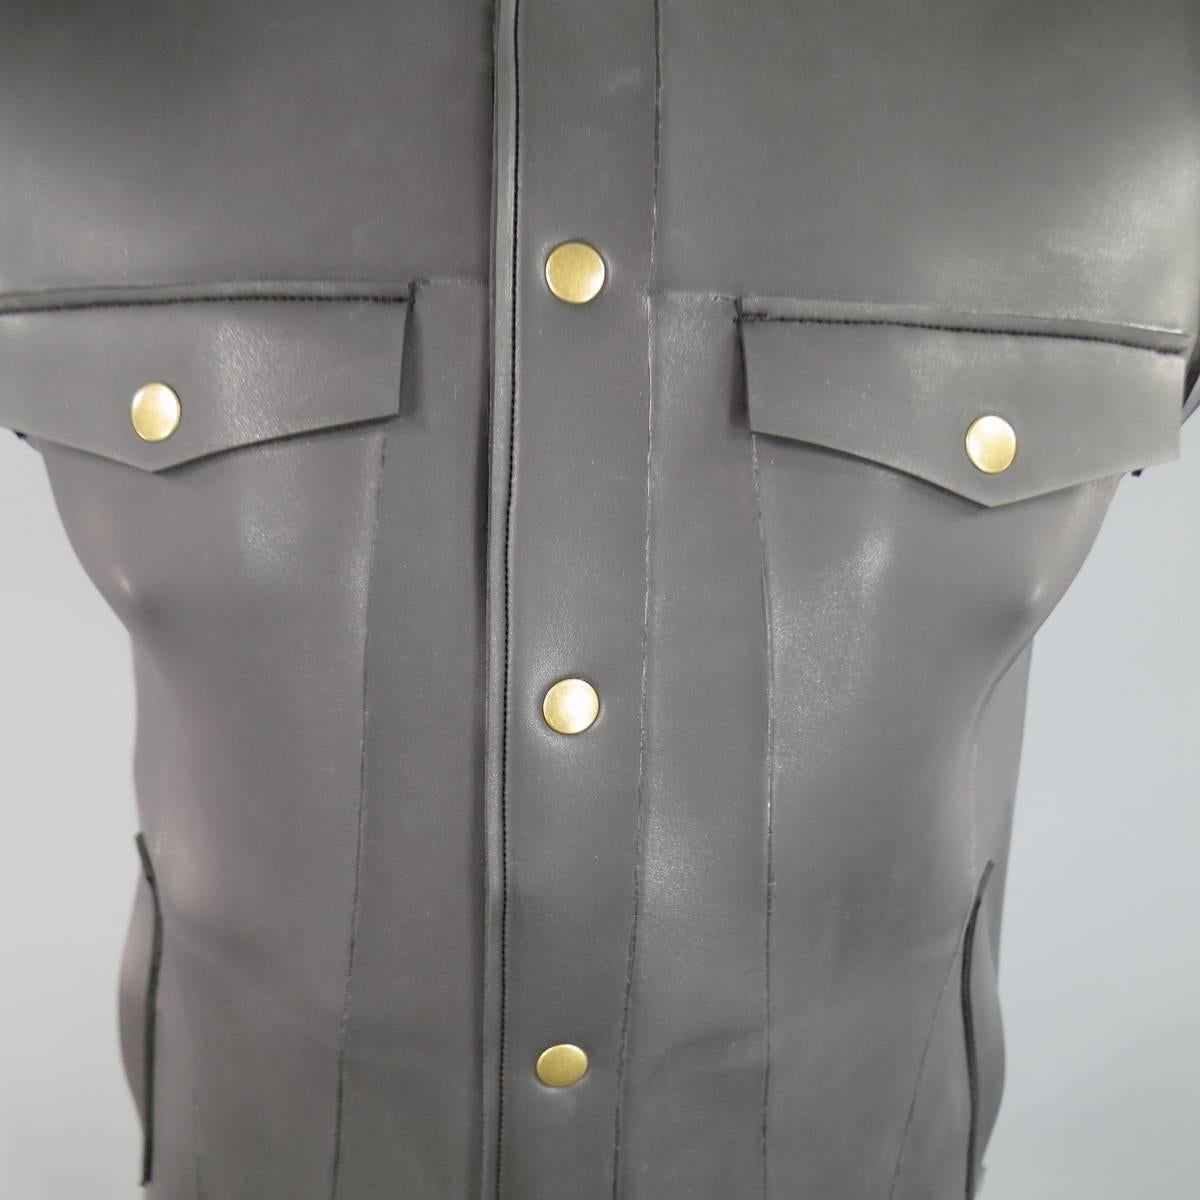 This rare ROBERT GELLER vest comes in charcoal grey neoprene and features a classic denim trucker jacket cut with gold tone snaps and pointed collar. Excellent Condition with imperfections on shoulder shown in detail shots. Made in Japan. Retails: